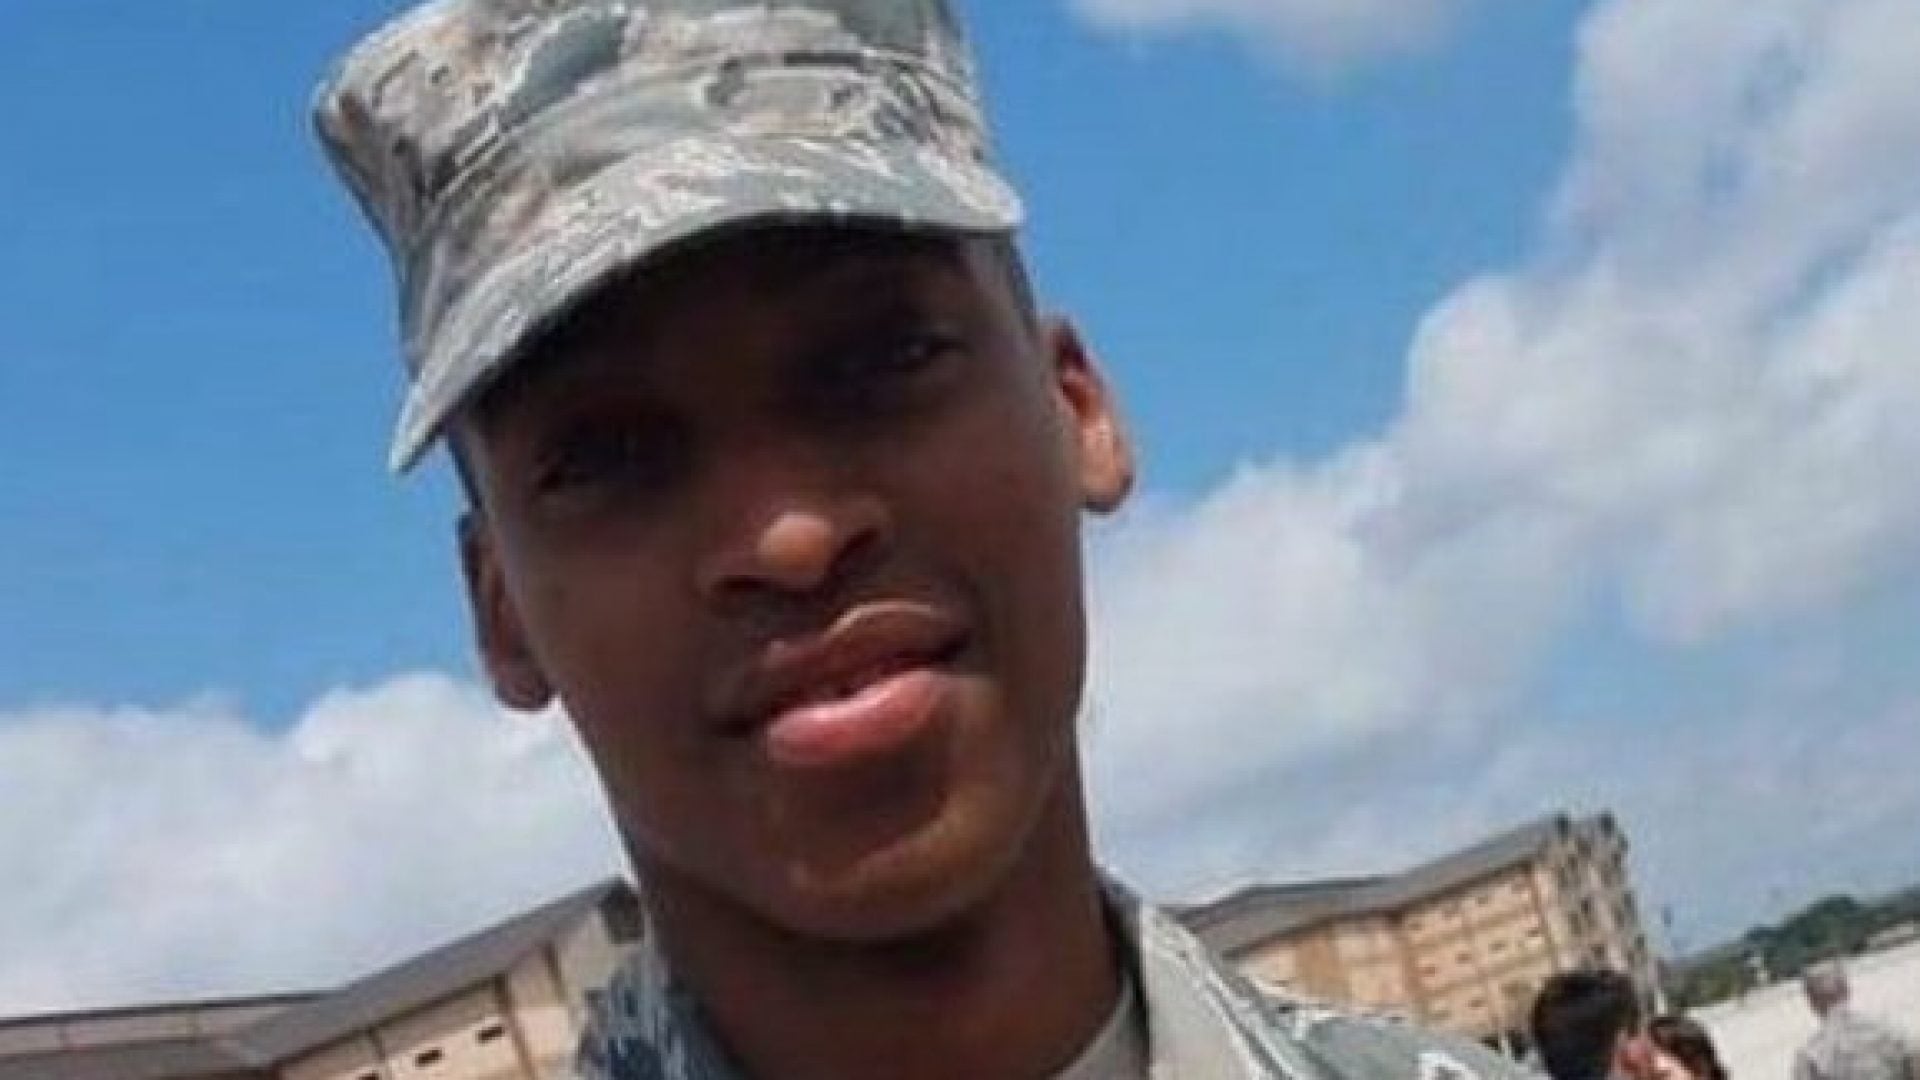 Indianapolis Police Fatally Shot A 21-Year-Old Black Man—He Recorded The Encounter